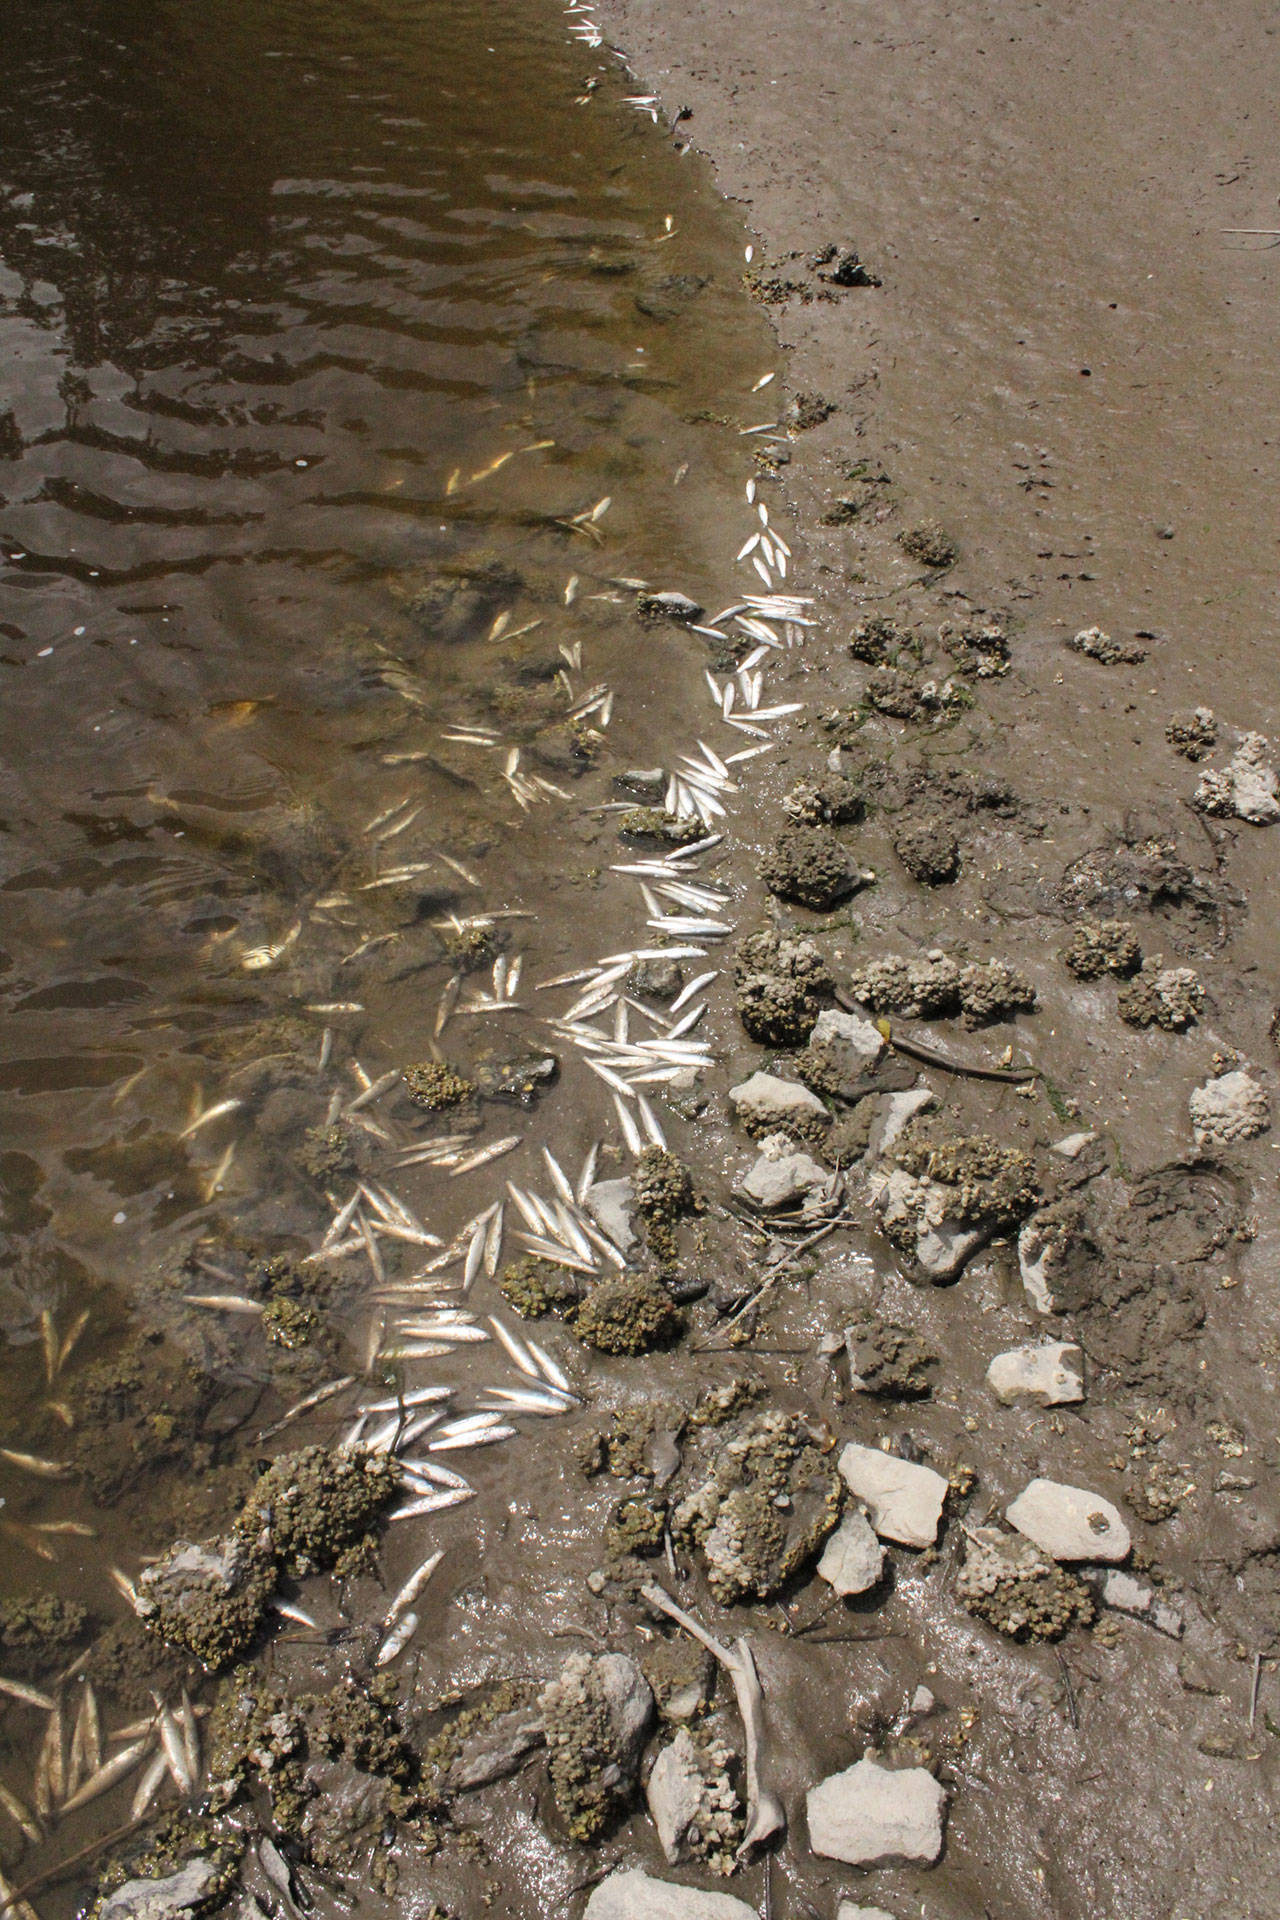 Dead Liberty Bay anchovies likely the result of natural processes